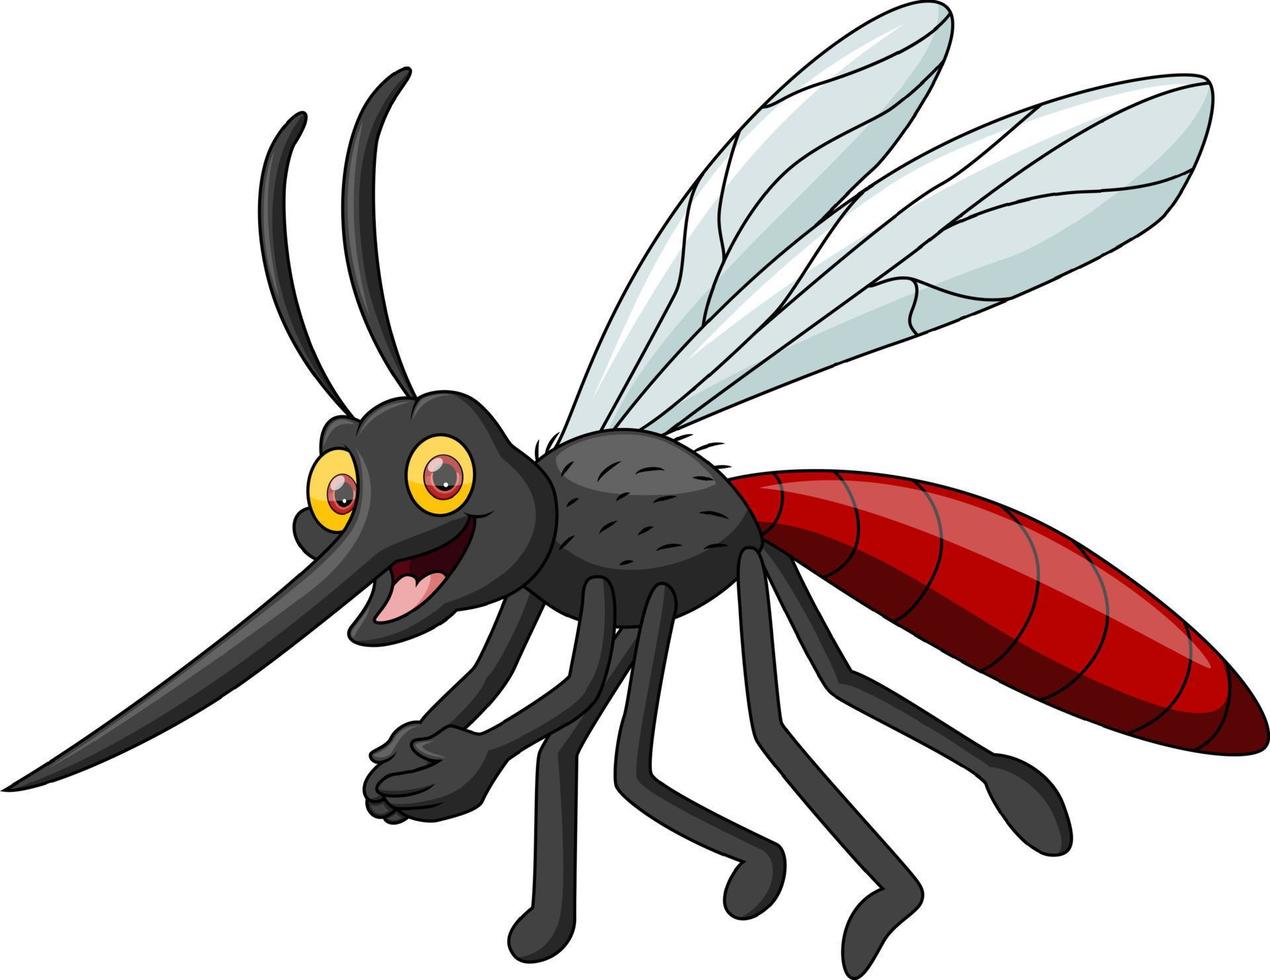 Cute mosquito cartoon on white background vector